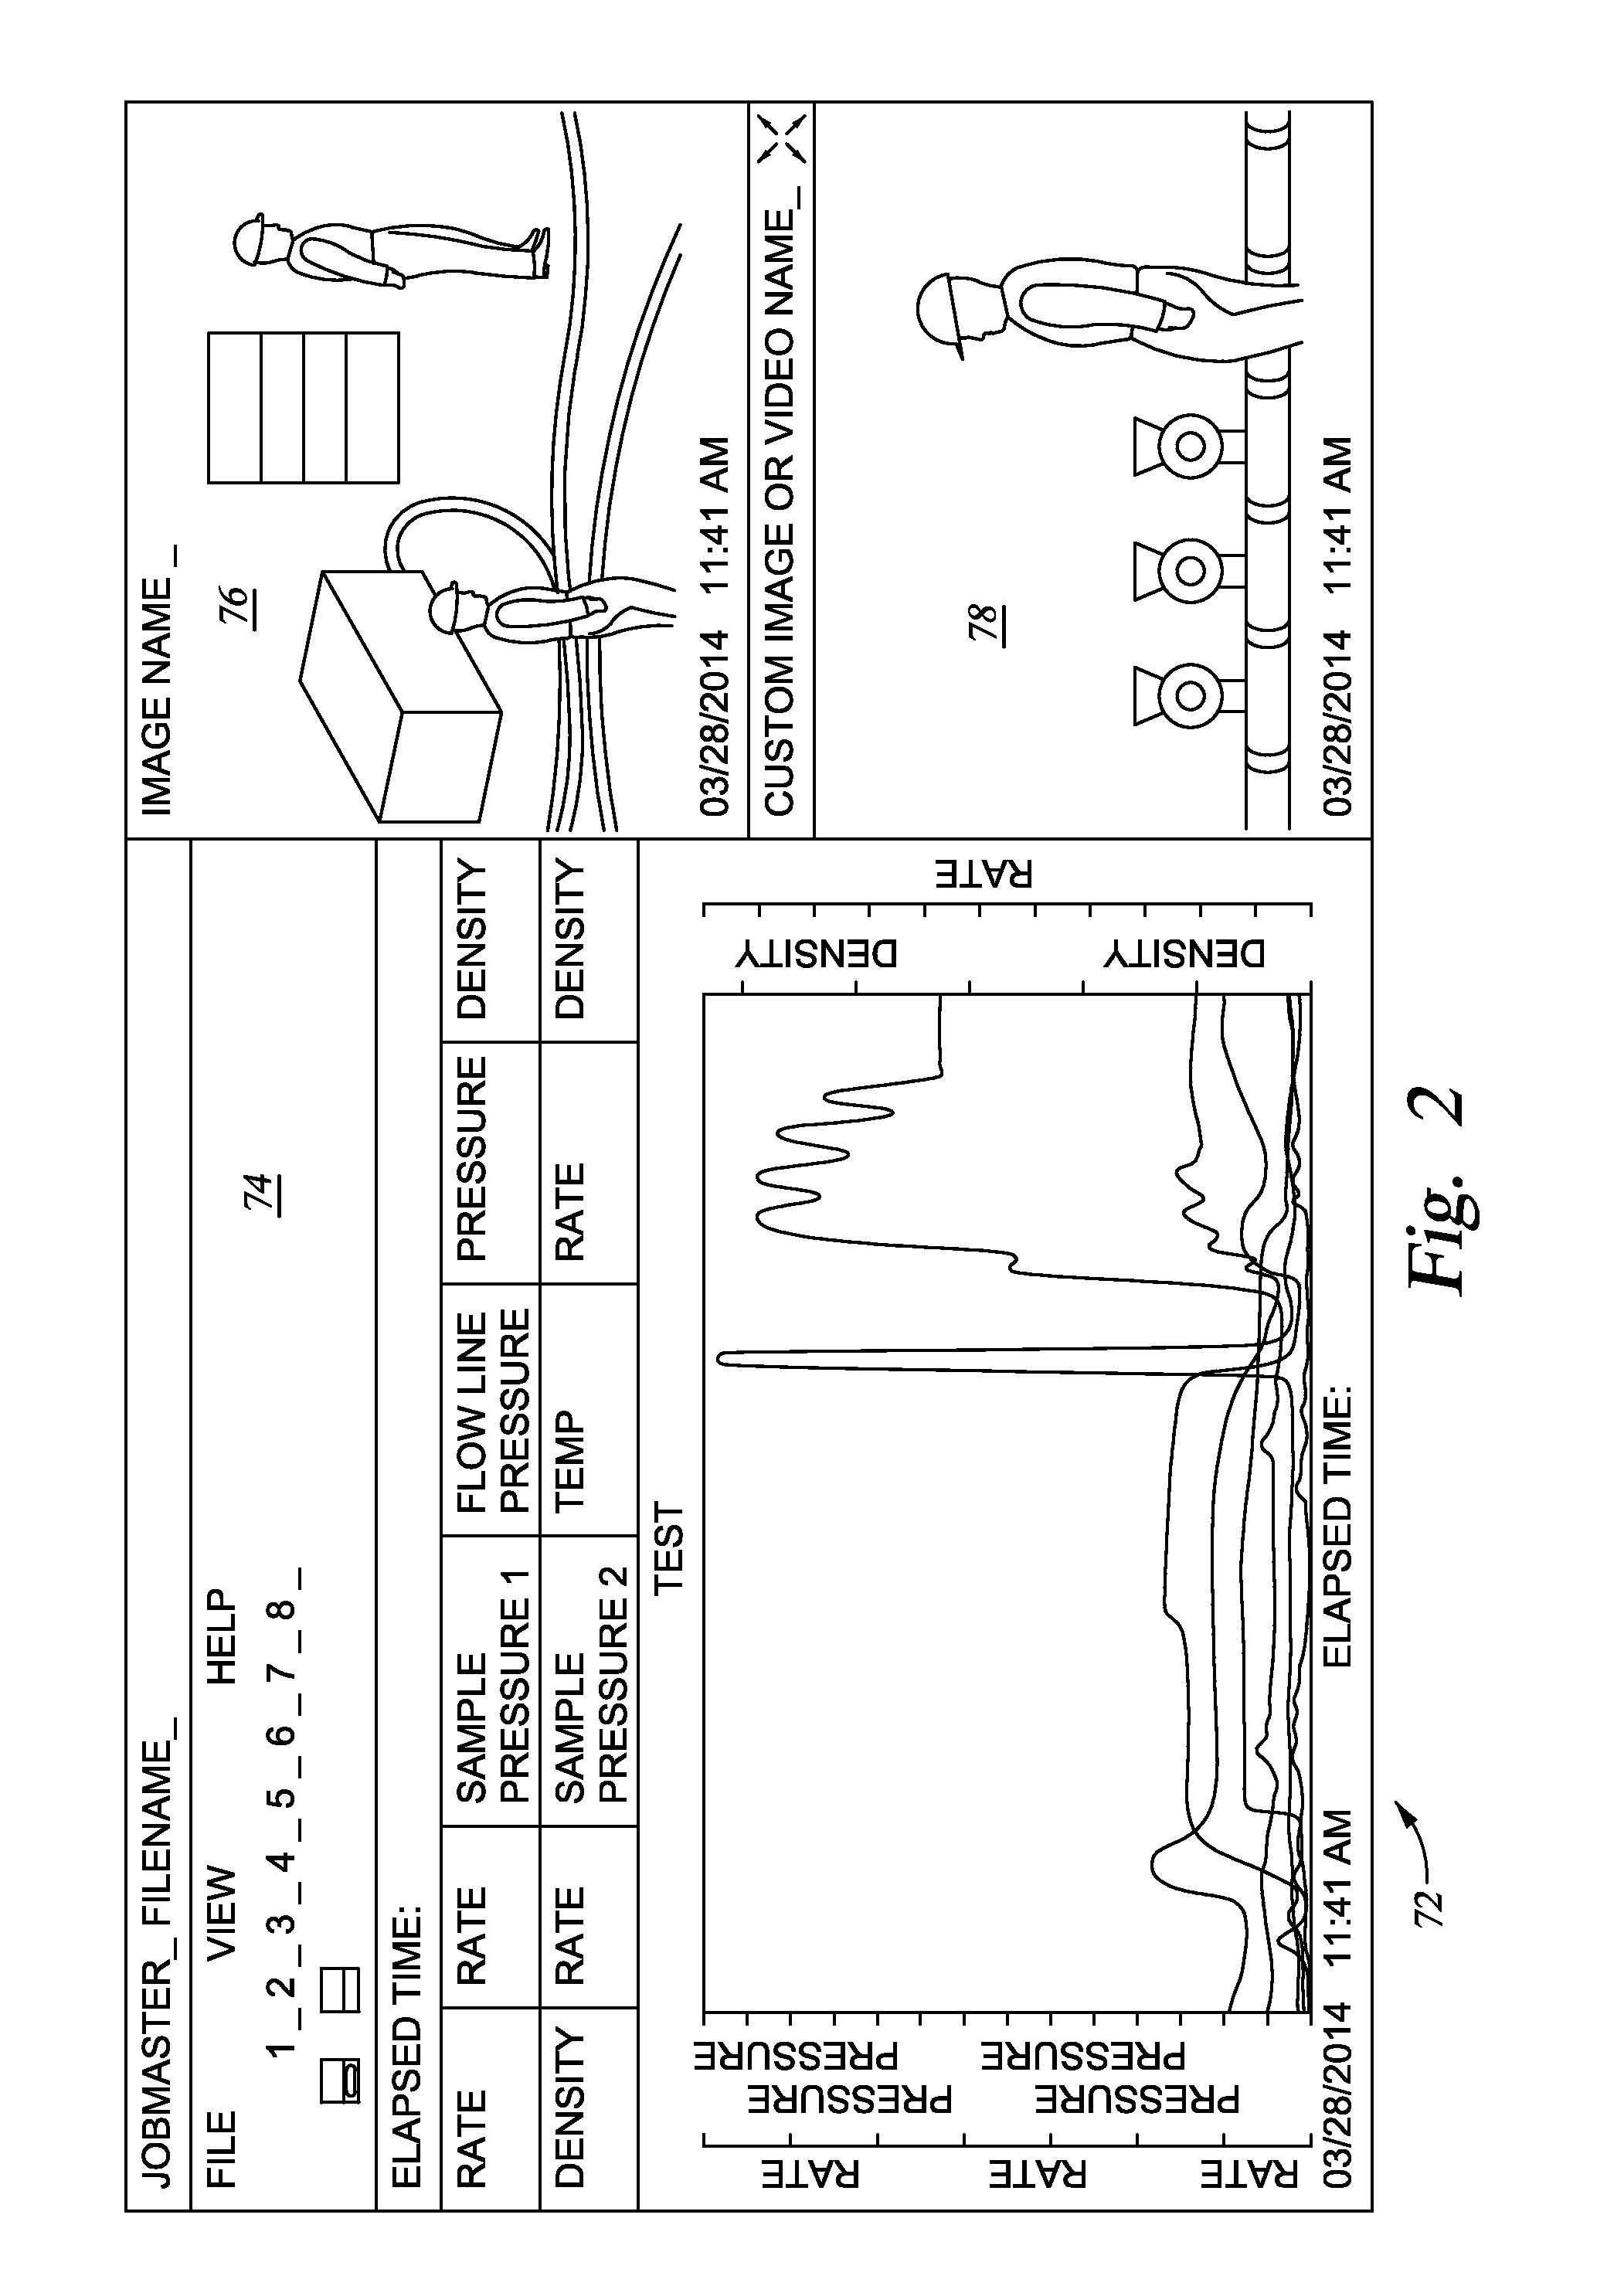 System and method for providing real-time maintenance, trouble-shooting, and process assurance for the oilfield